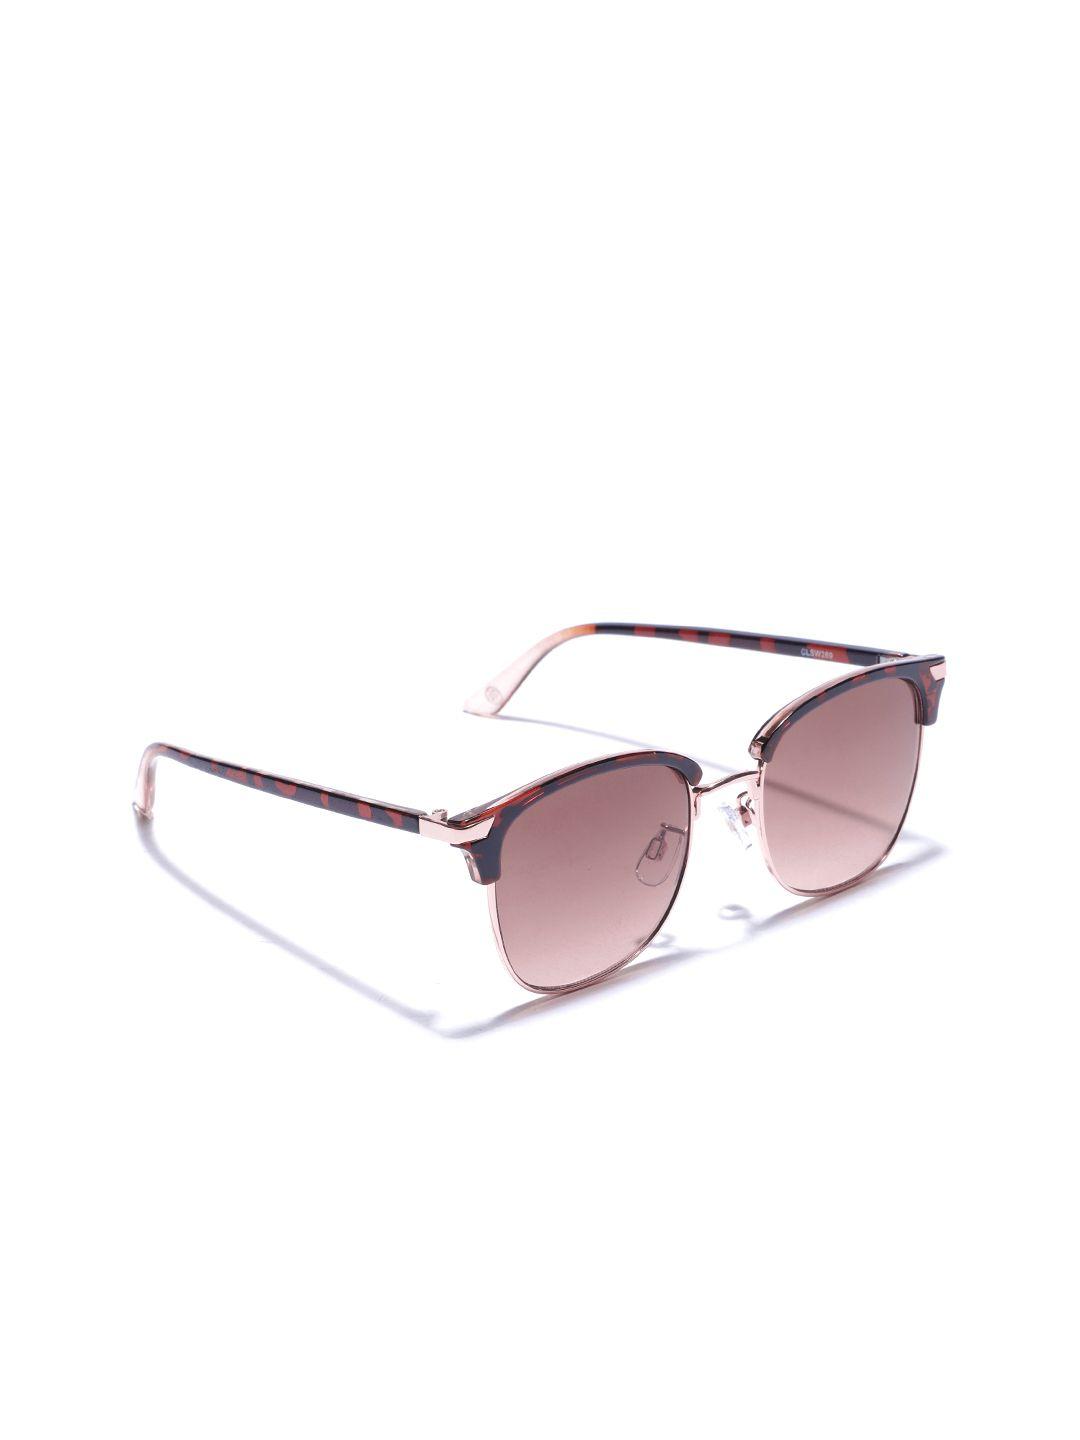 carlton-london-women-square-sunglasses-with-uv-protected-lens-clsw289